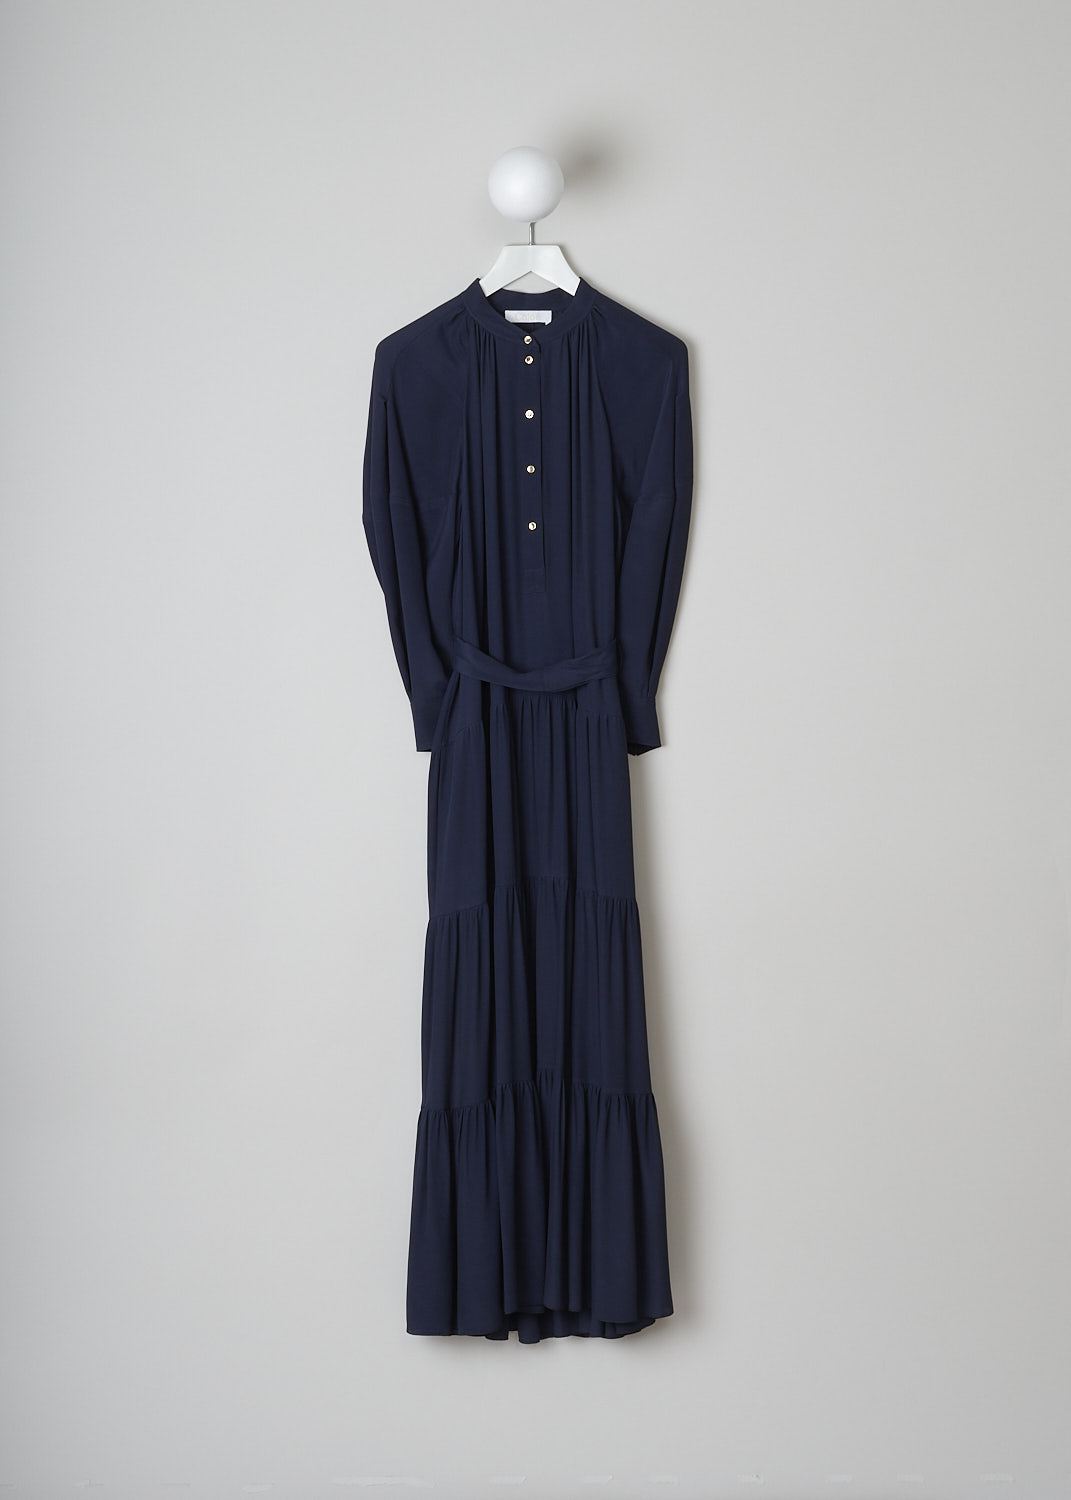 CHLOÃ‰, INK NAVY GATHERED CREPE MAXI DRESS, CHC21SRO020324C3_INK_NAVY,  Blue, Front, This Inky Navy dress has a mandarin collar with a front button placket with gold-tone buttons that reaches halfway down the pleated bodice. The long balloon sleeves have buttoned cuffs with those same gold-tone buttons. A matching detachable fabric belt can be used to cinch in the waist. The dress has a tiered maxi skirt with two side slanted pockets.
